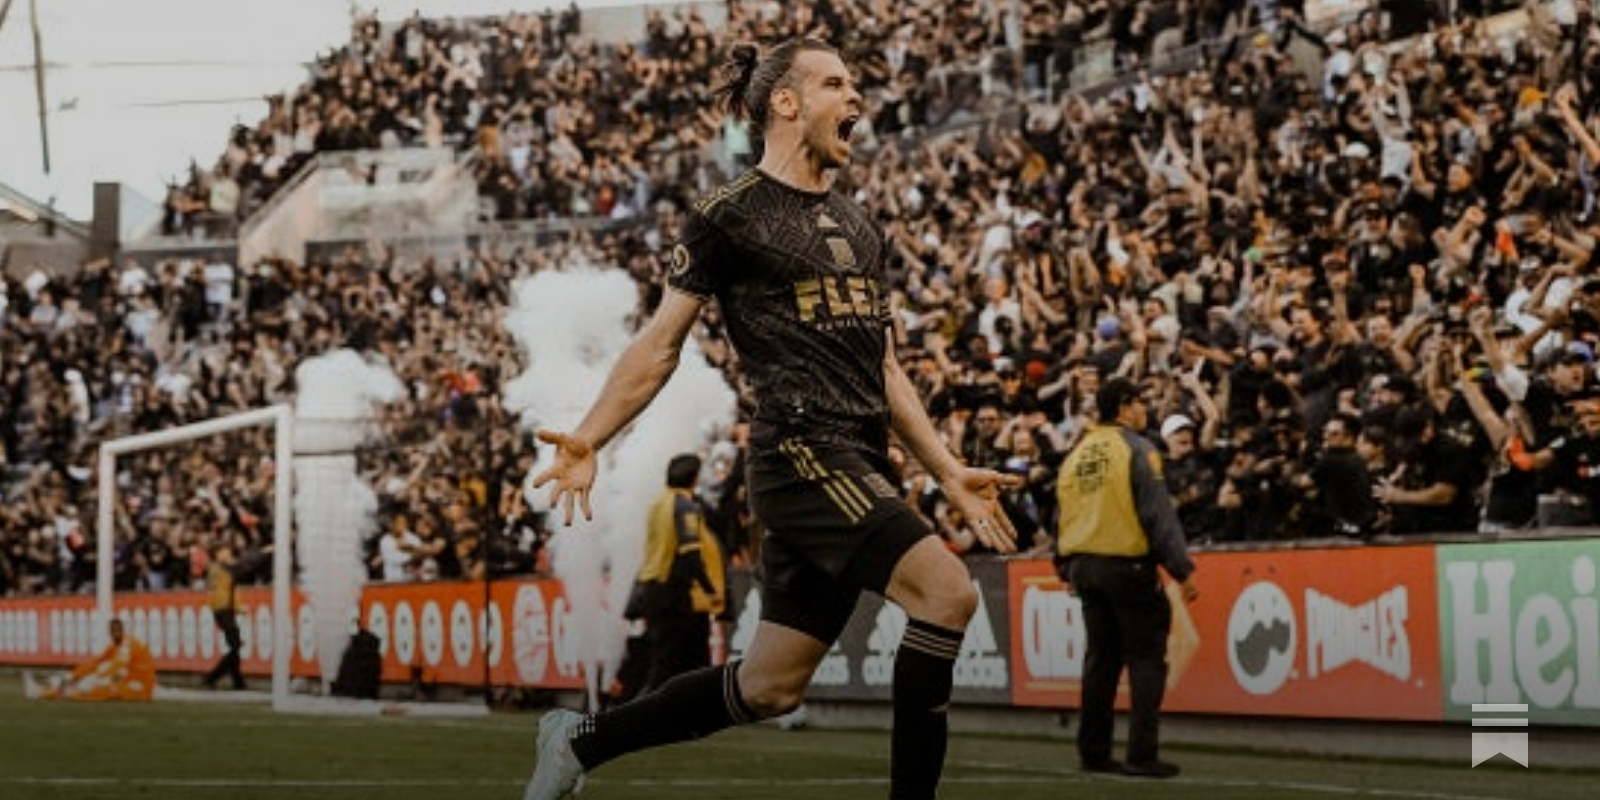 LAFC gets record-setting valuation of more than $700 million - Los